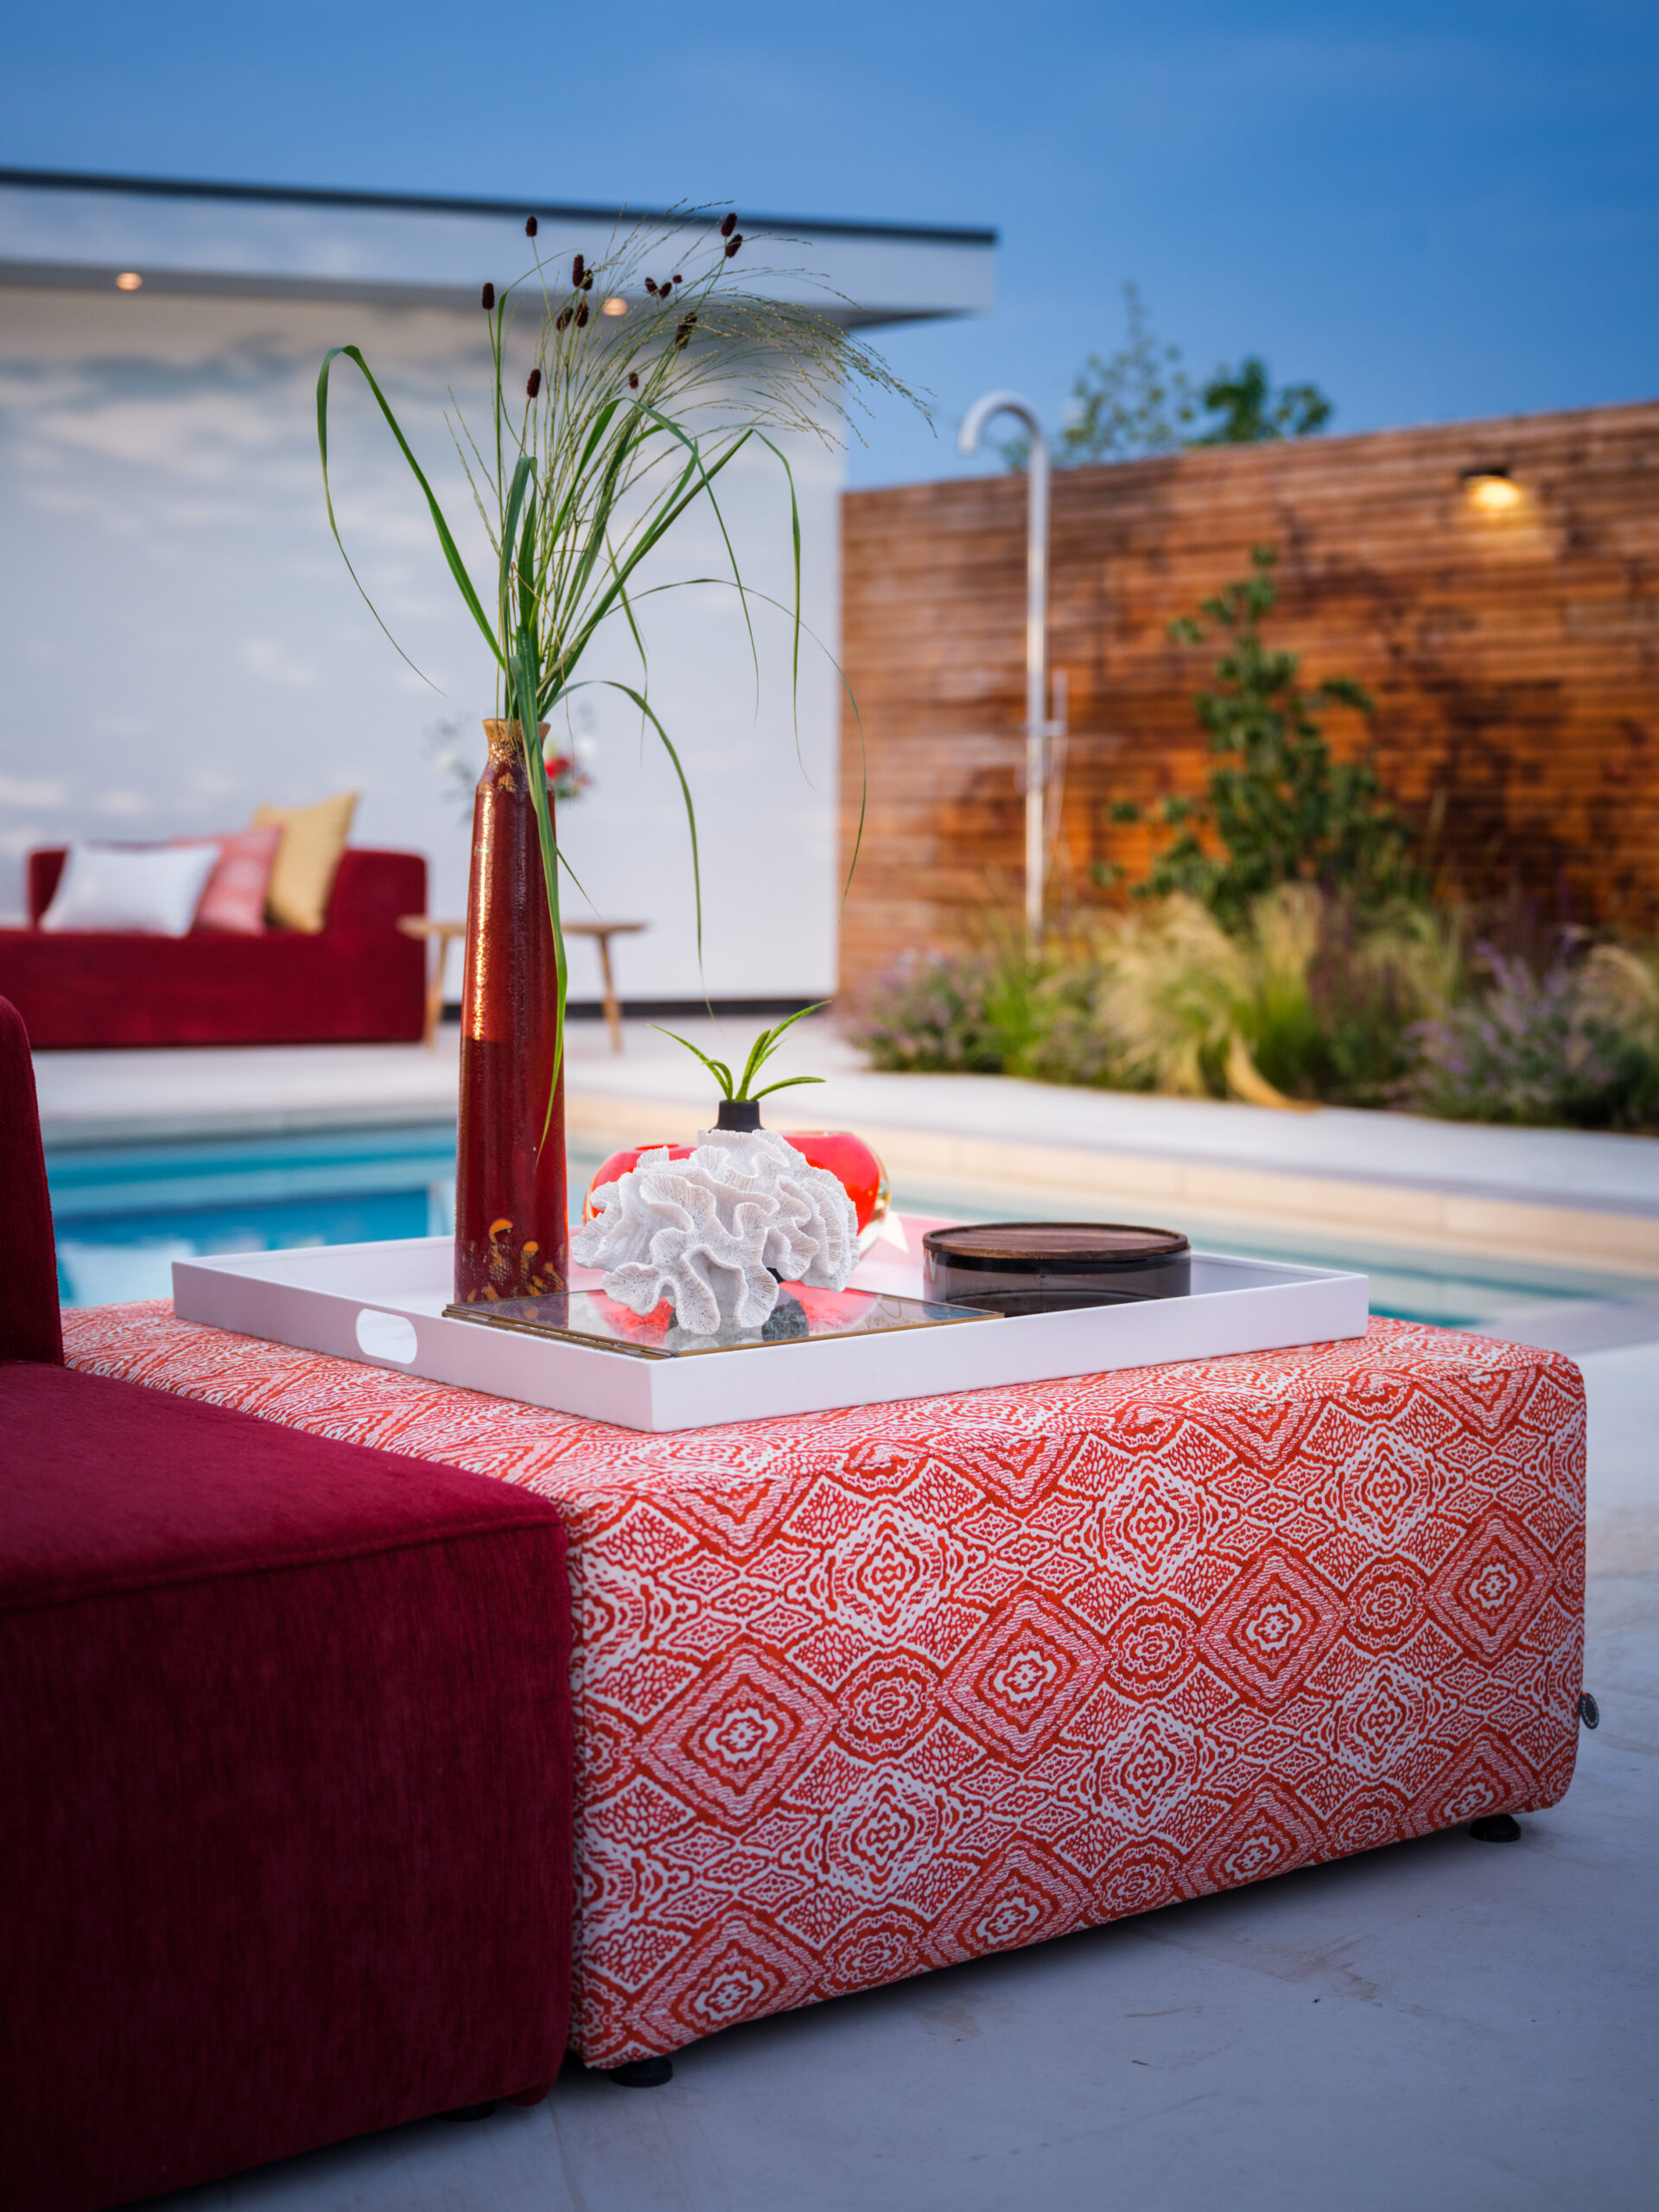 Outdoor Lifestyle - Loungeset - Over ons